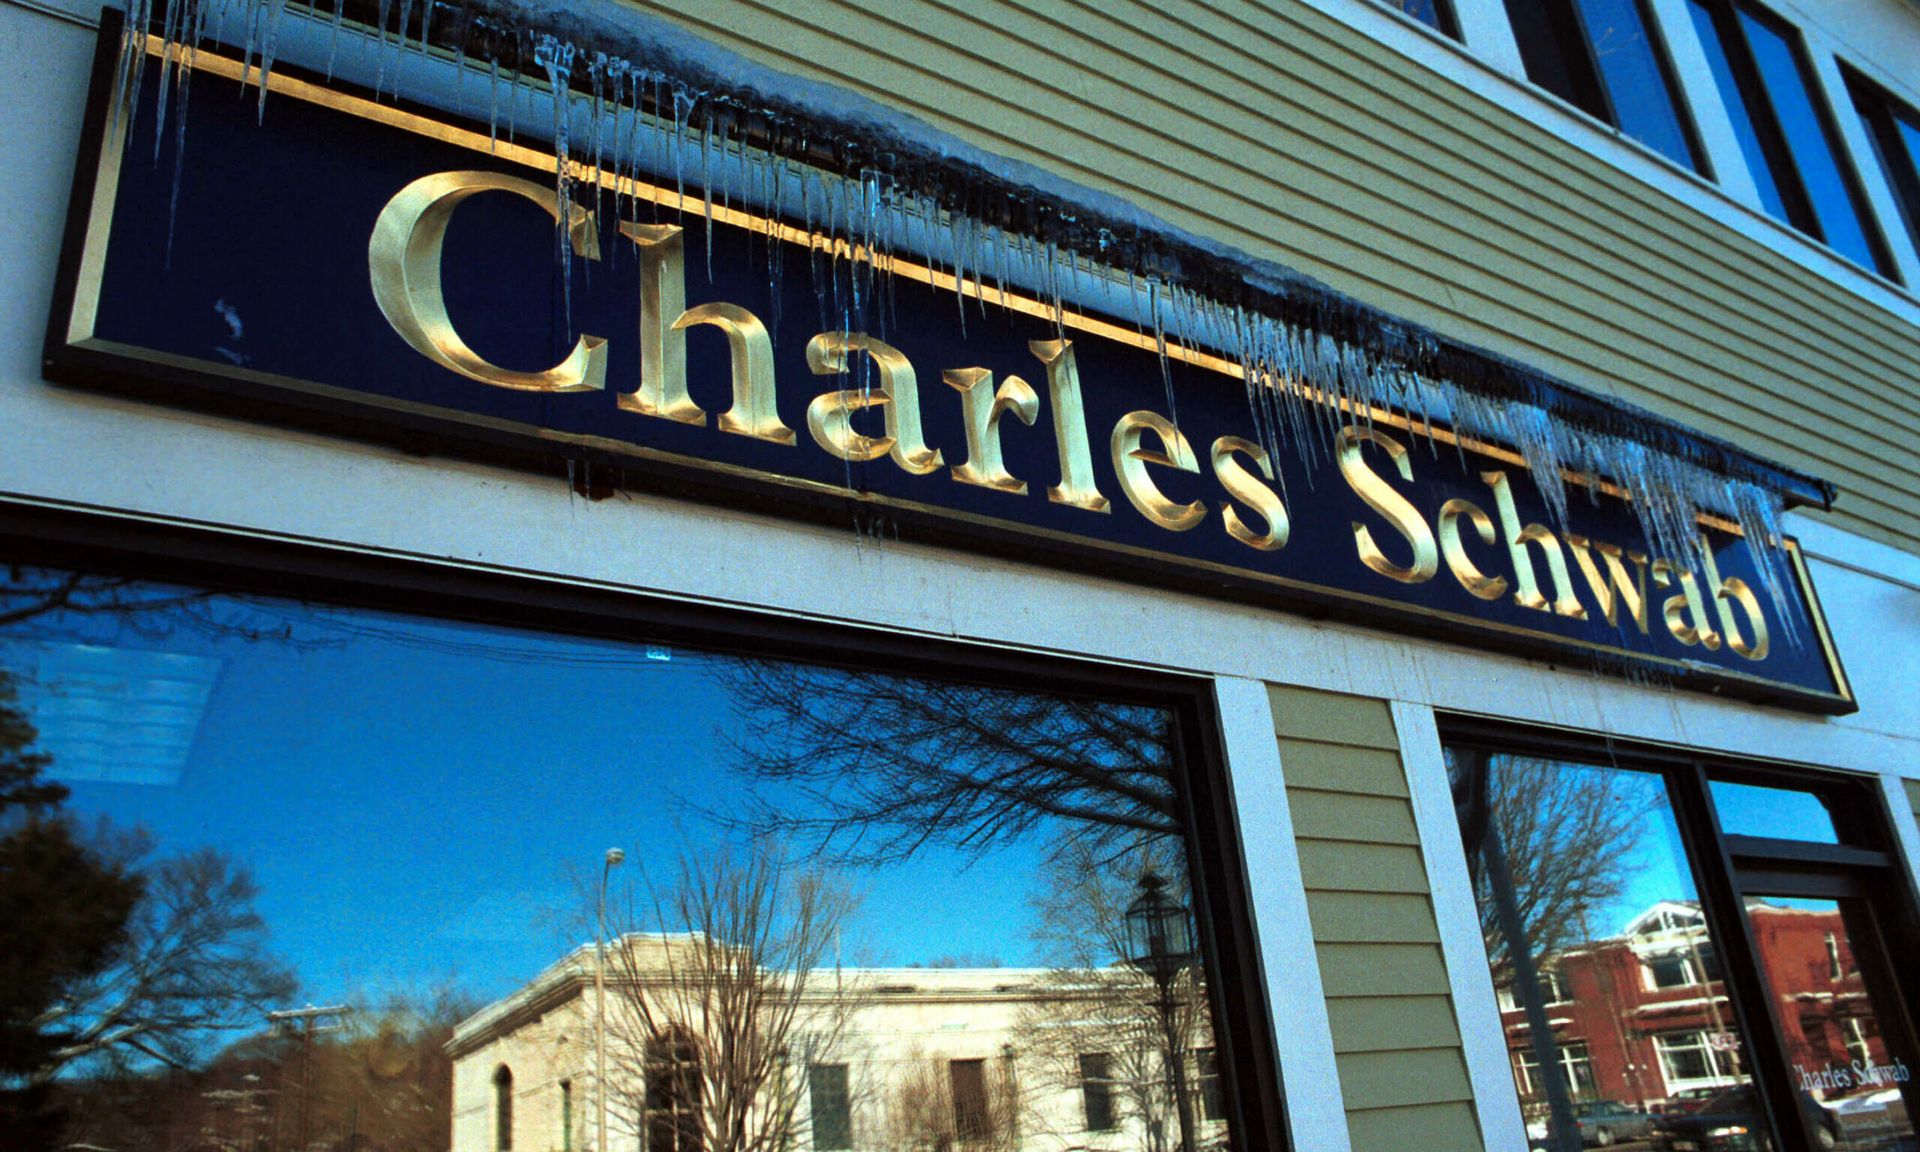 Icicles hang on a Charles Schwab sign January 10, 2001 in Lexington MA. Financial advisory firms face distinct risks tied to cybersecurity. (Photo by Darren McCollester/Newsmakers)